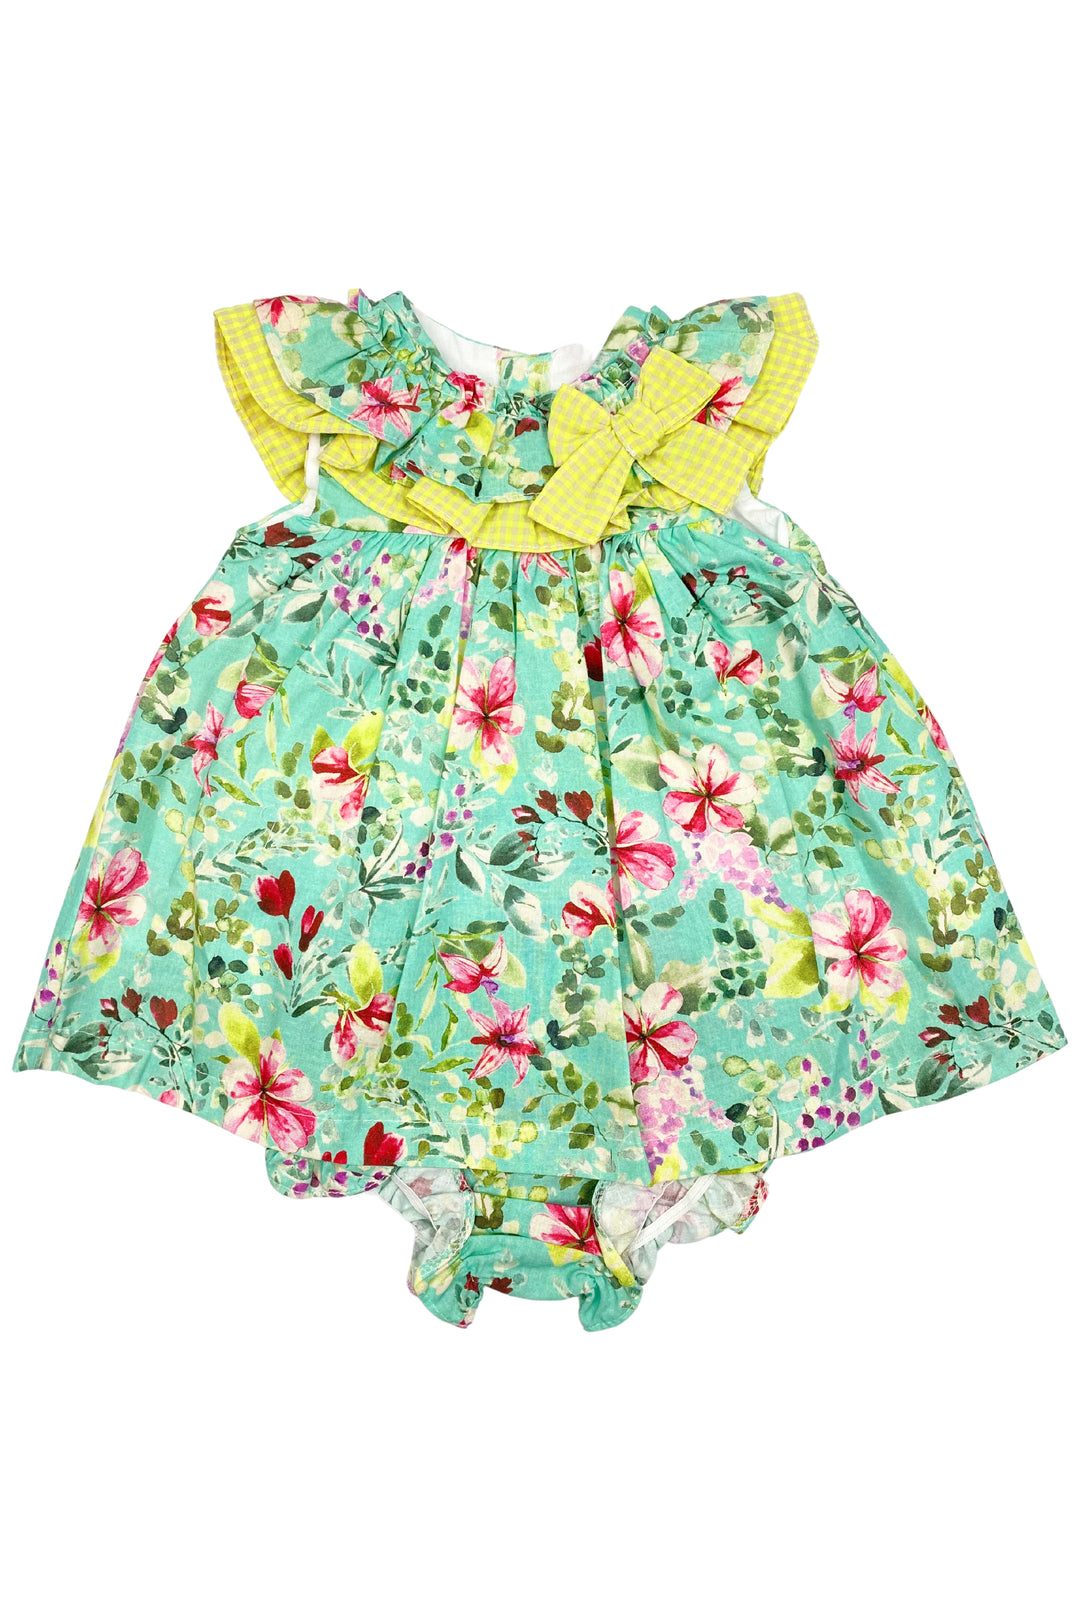 Valentina Bebes "Suki" Turquoise Floral Dress & Bloomers | iphoneandroidapplications